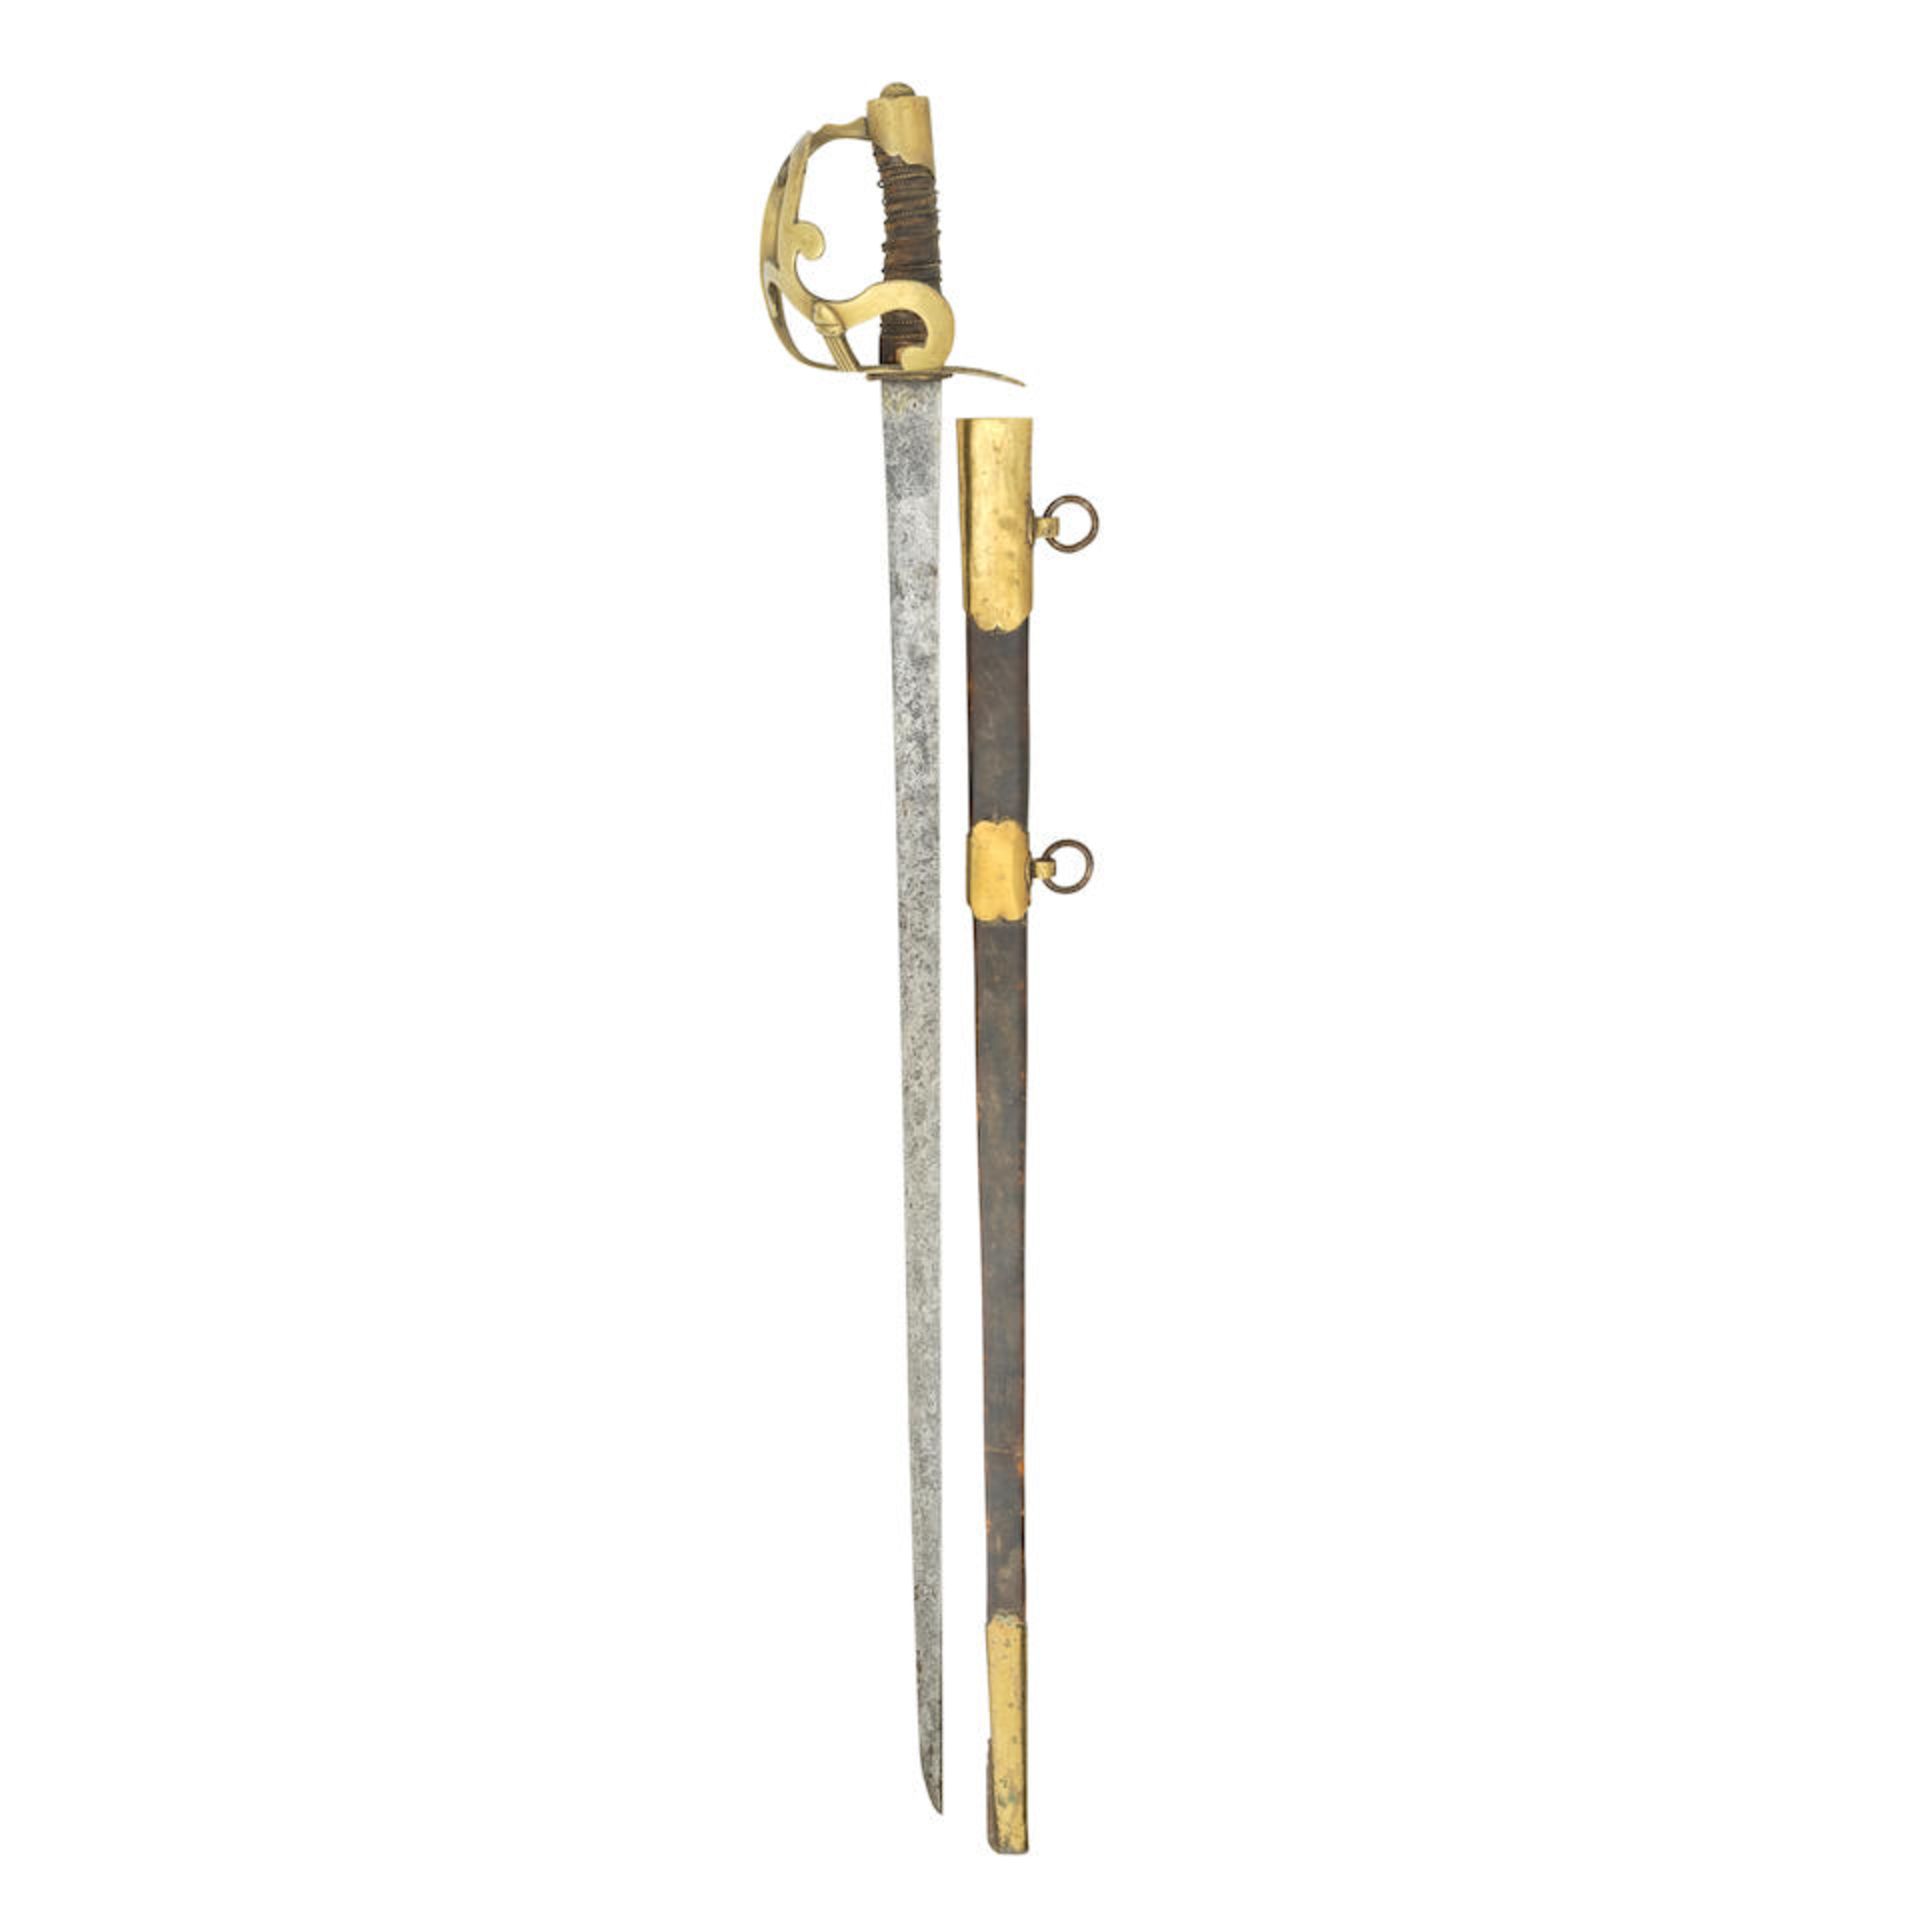 A French Revolutionary Period Heavy Cavalry Officer's Sword